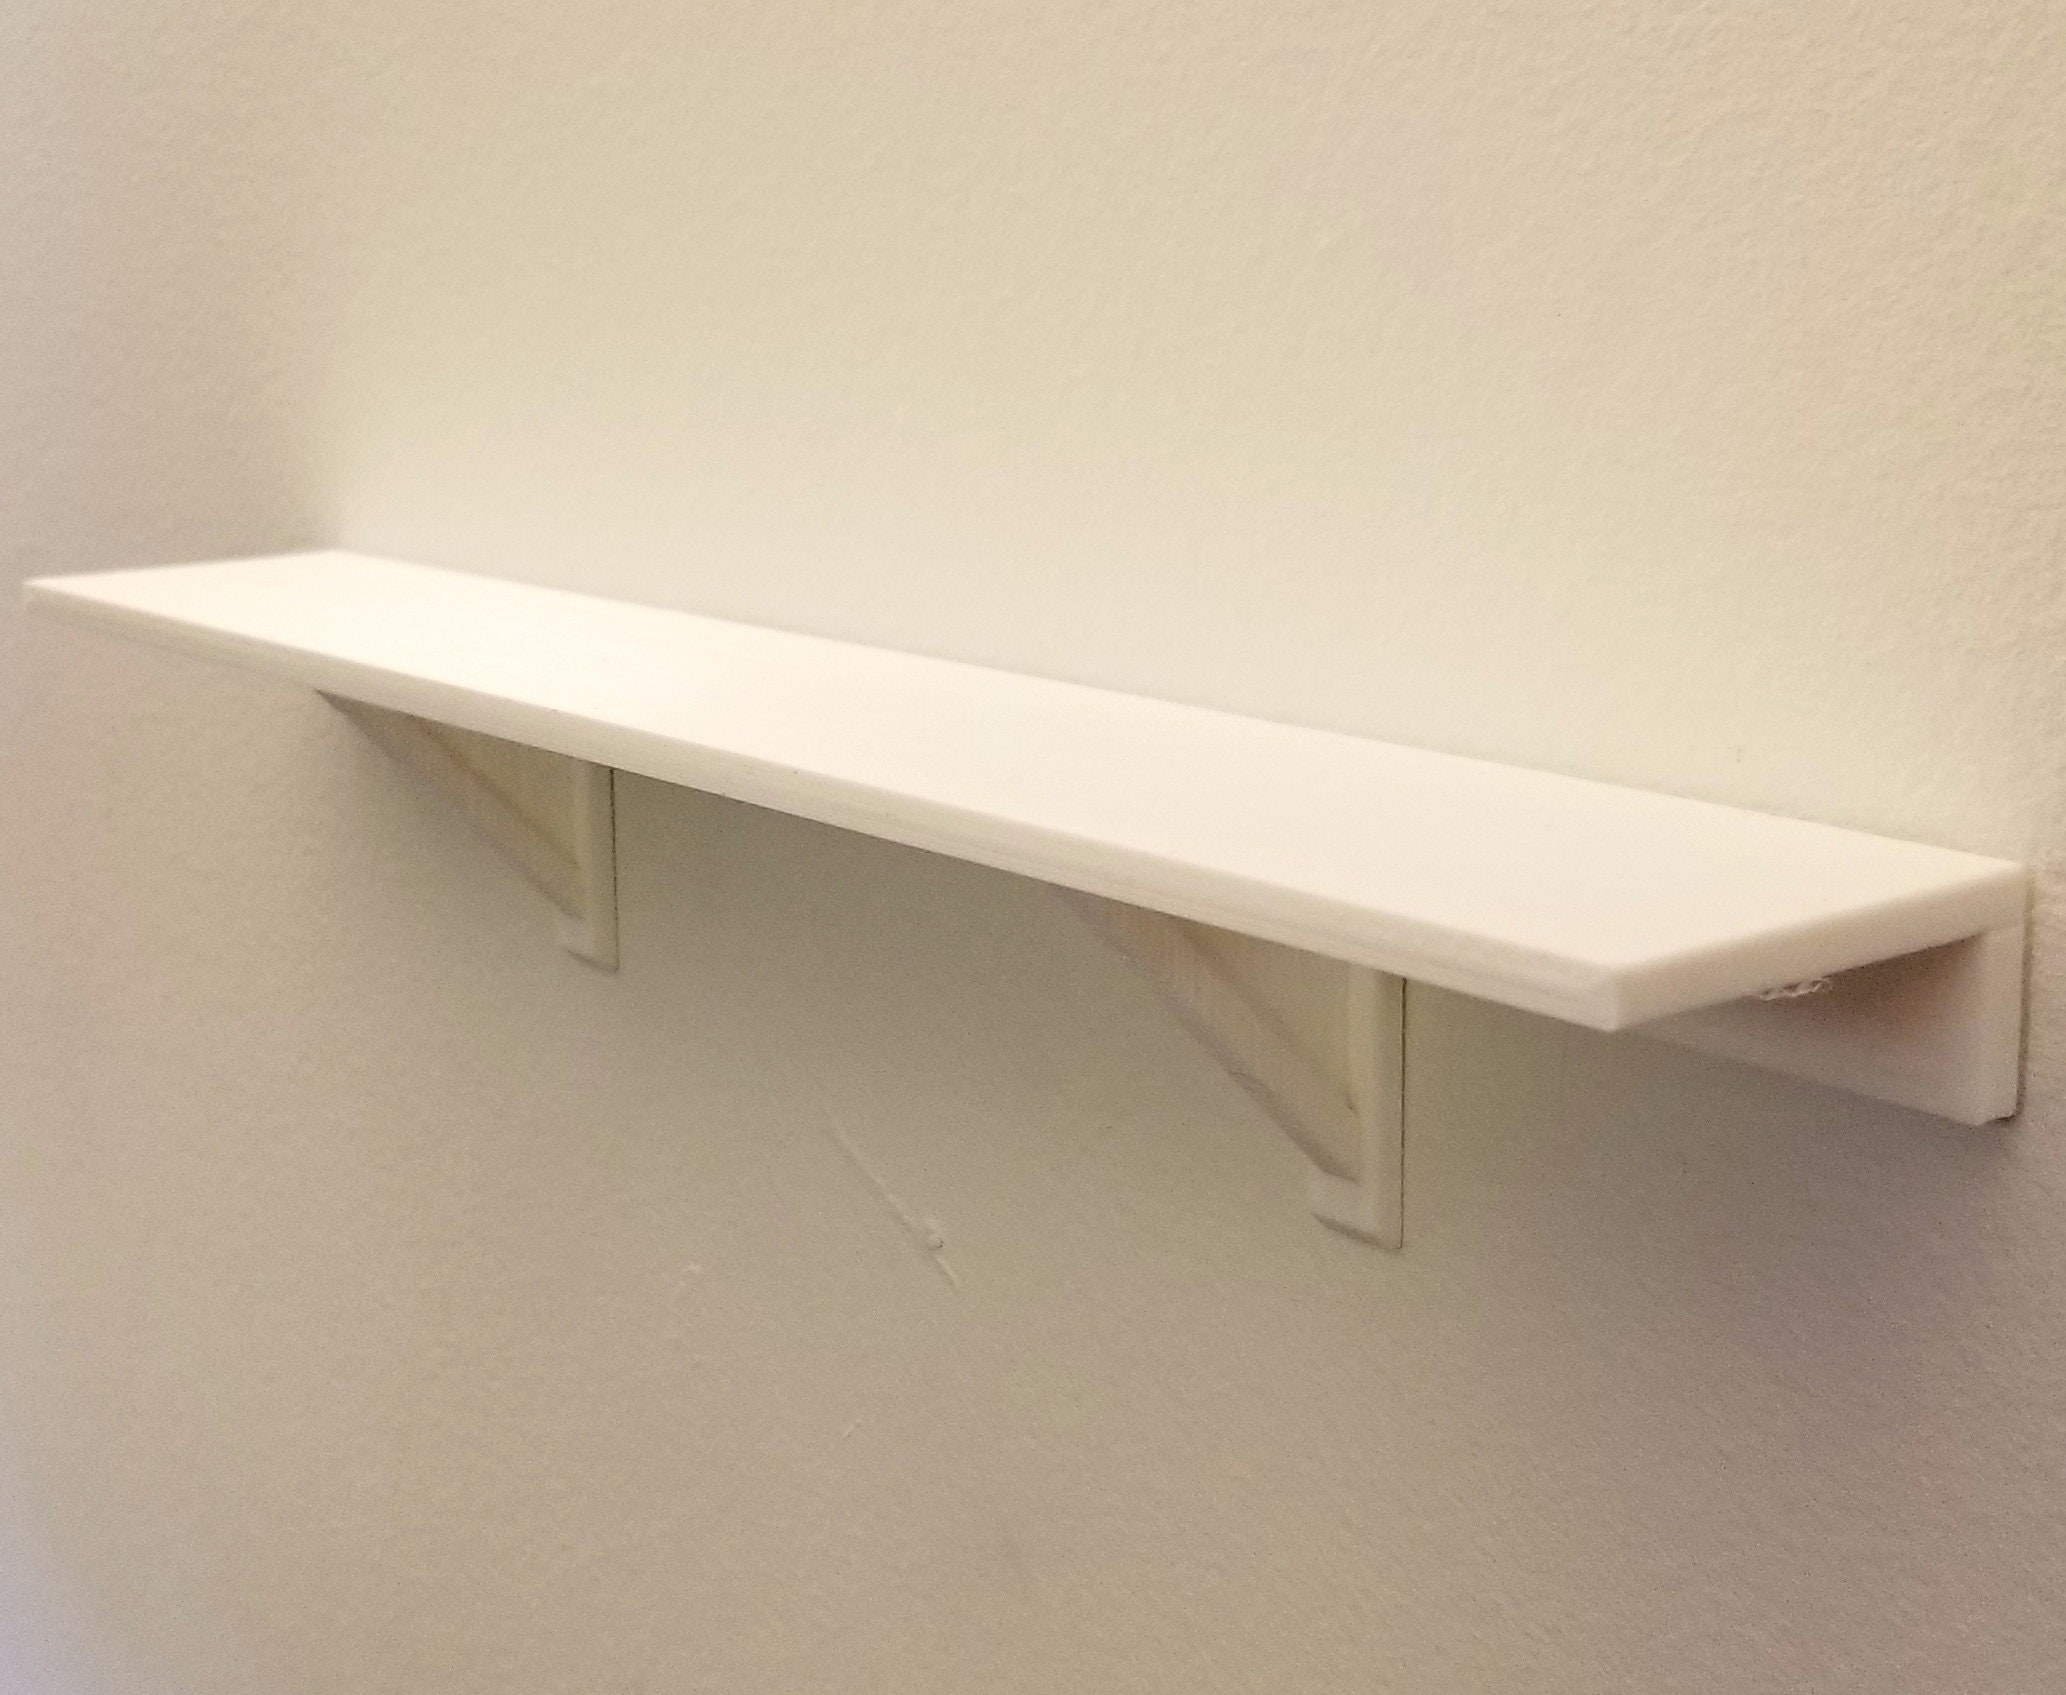 12 X 2 Inch White Wall Shelf Free Shipping Uses 3M Command Strips